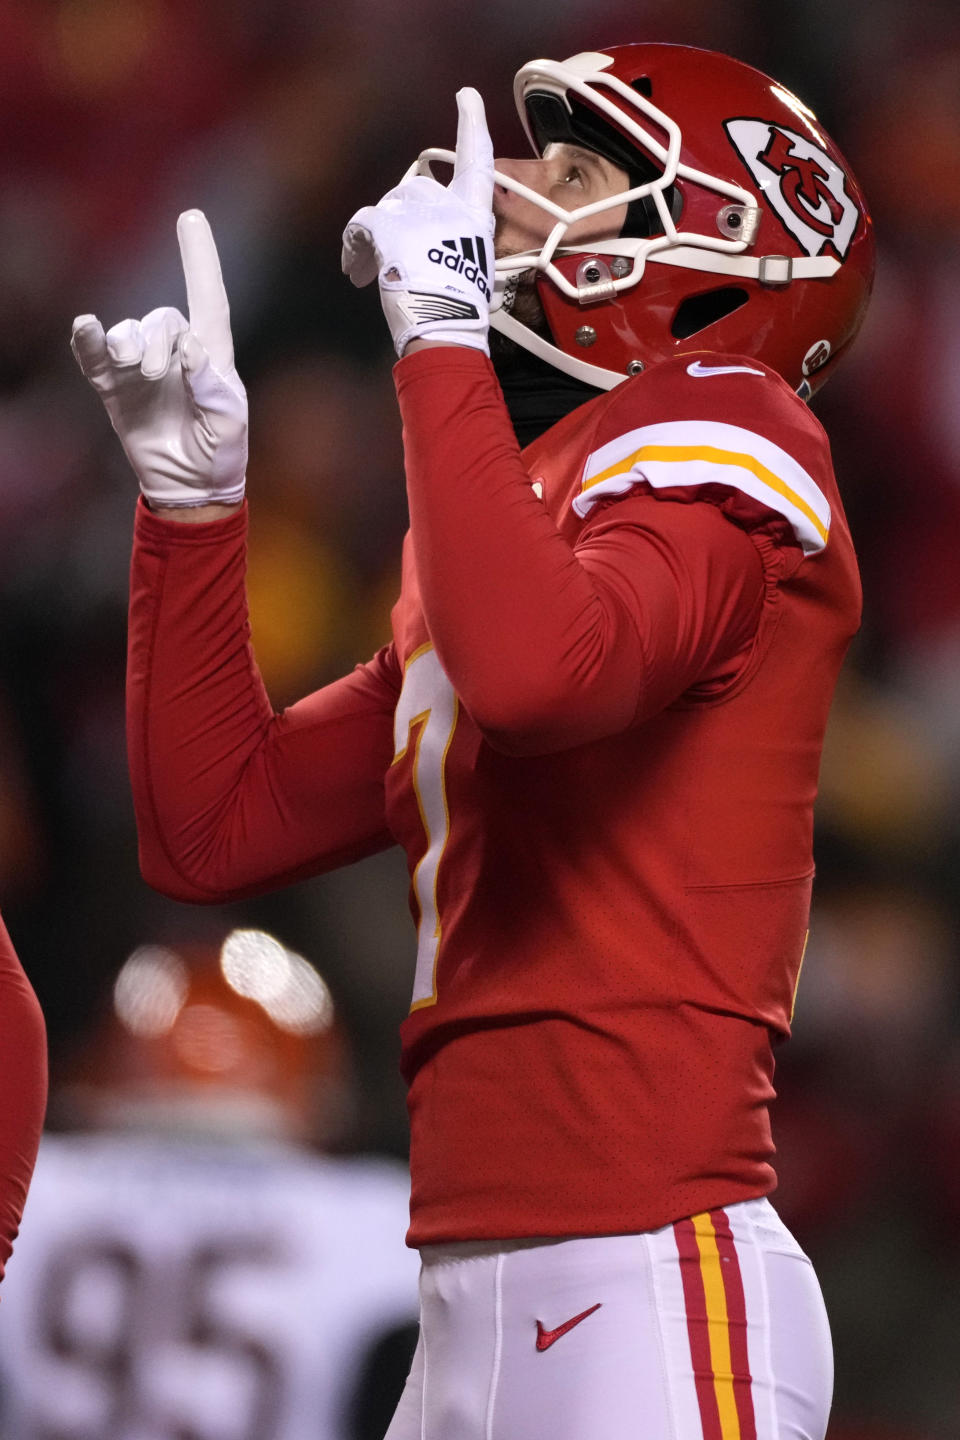 Kansas City Chiefs place kicker Harrison Butker (7) celebrates his field goal against the Cincinnati Bengals during the first half of the NFL AFC Championship playoff football game, Sunday, Jan. 29, 2023, in Kansas City, Mo. (AP Photo/Jeff Roberson)